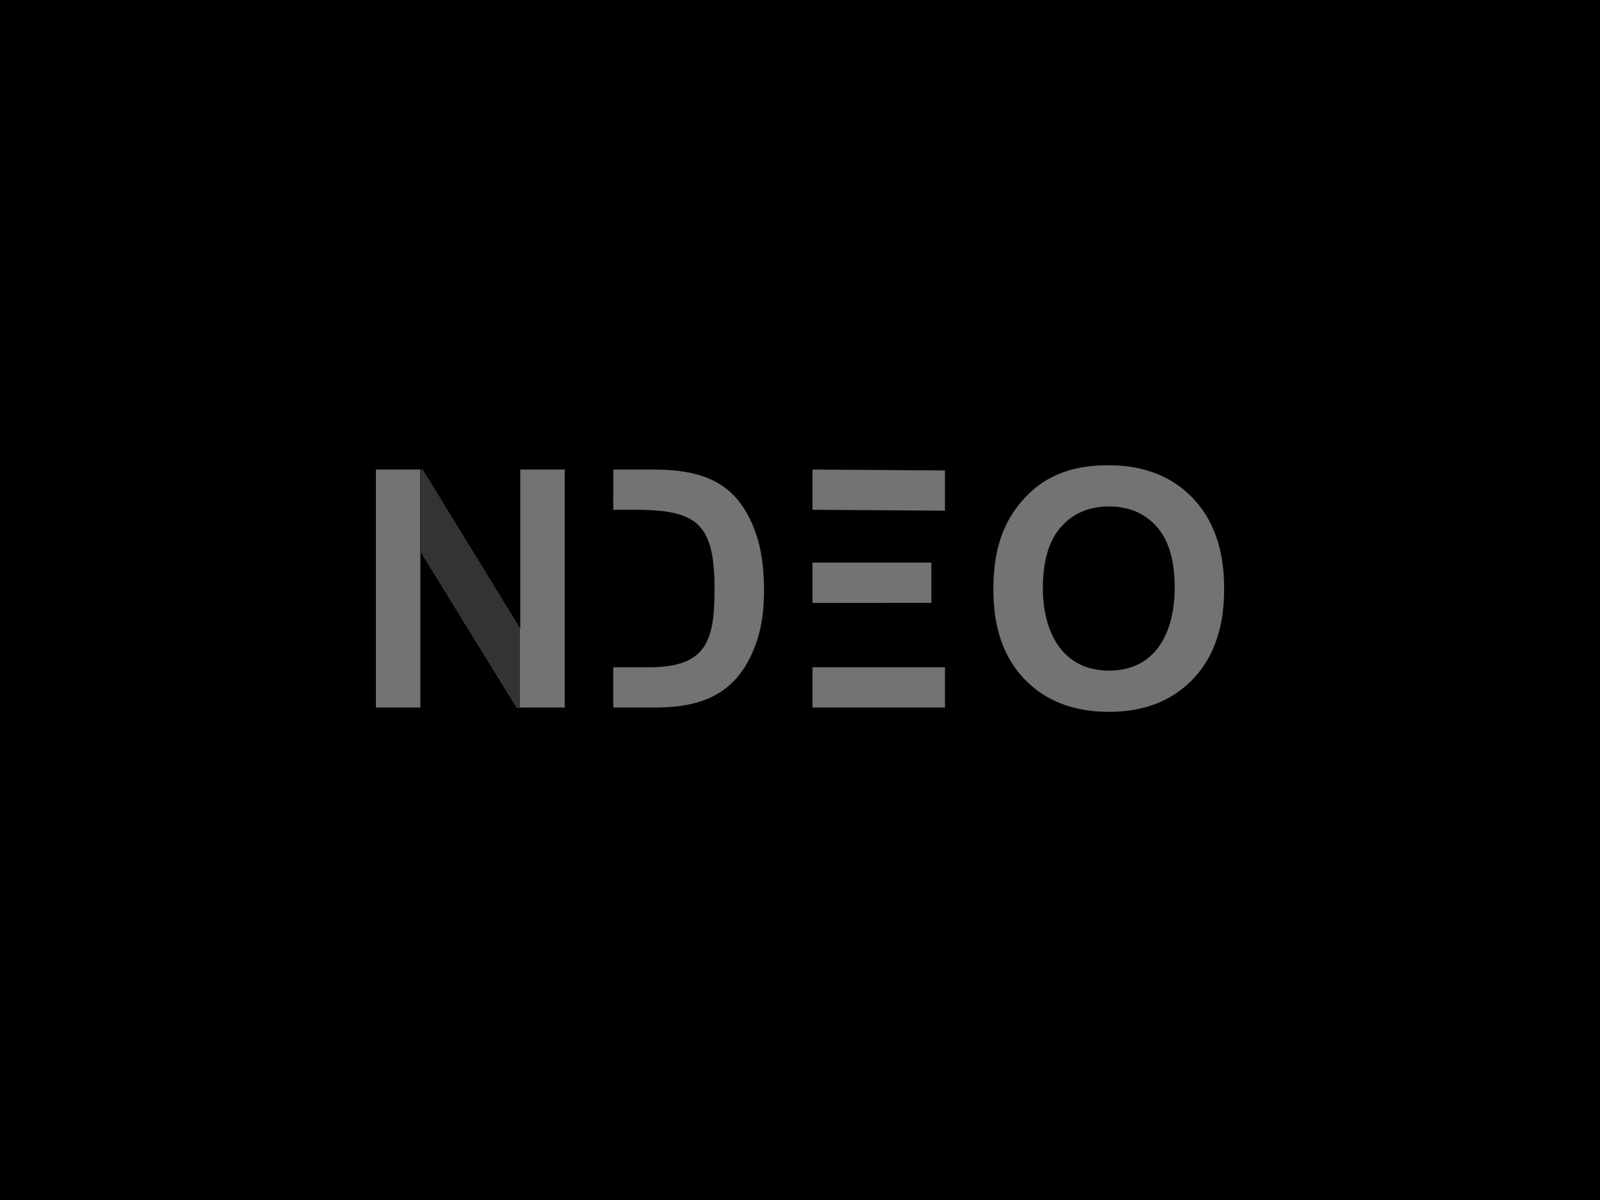 Ndeo logo by Arif Sufyan on Dribbble